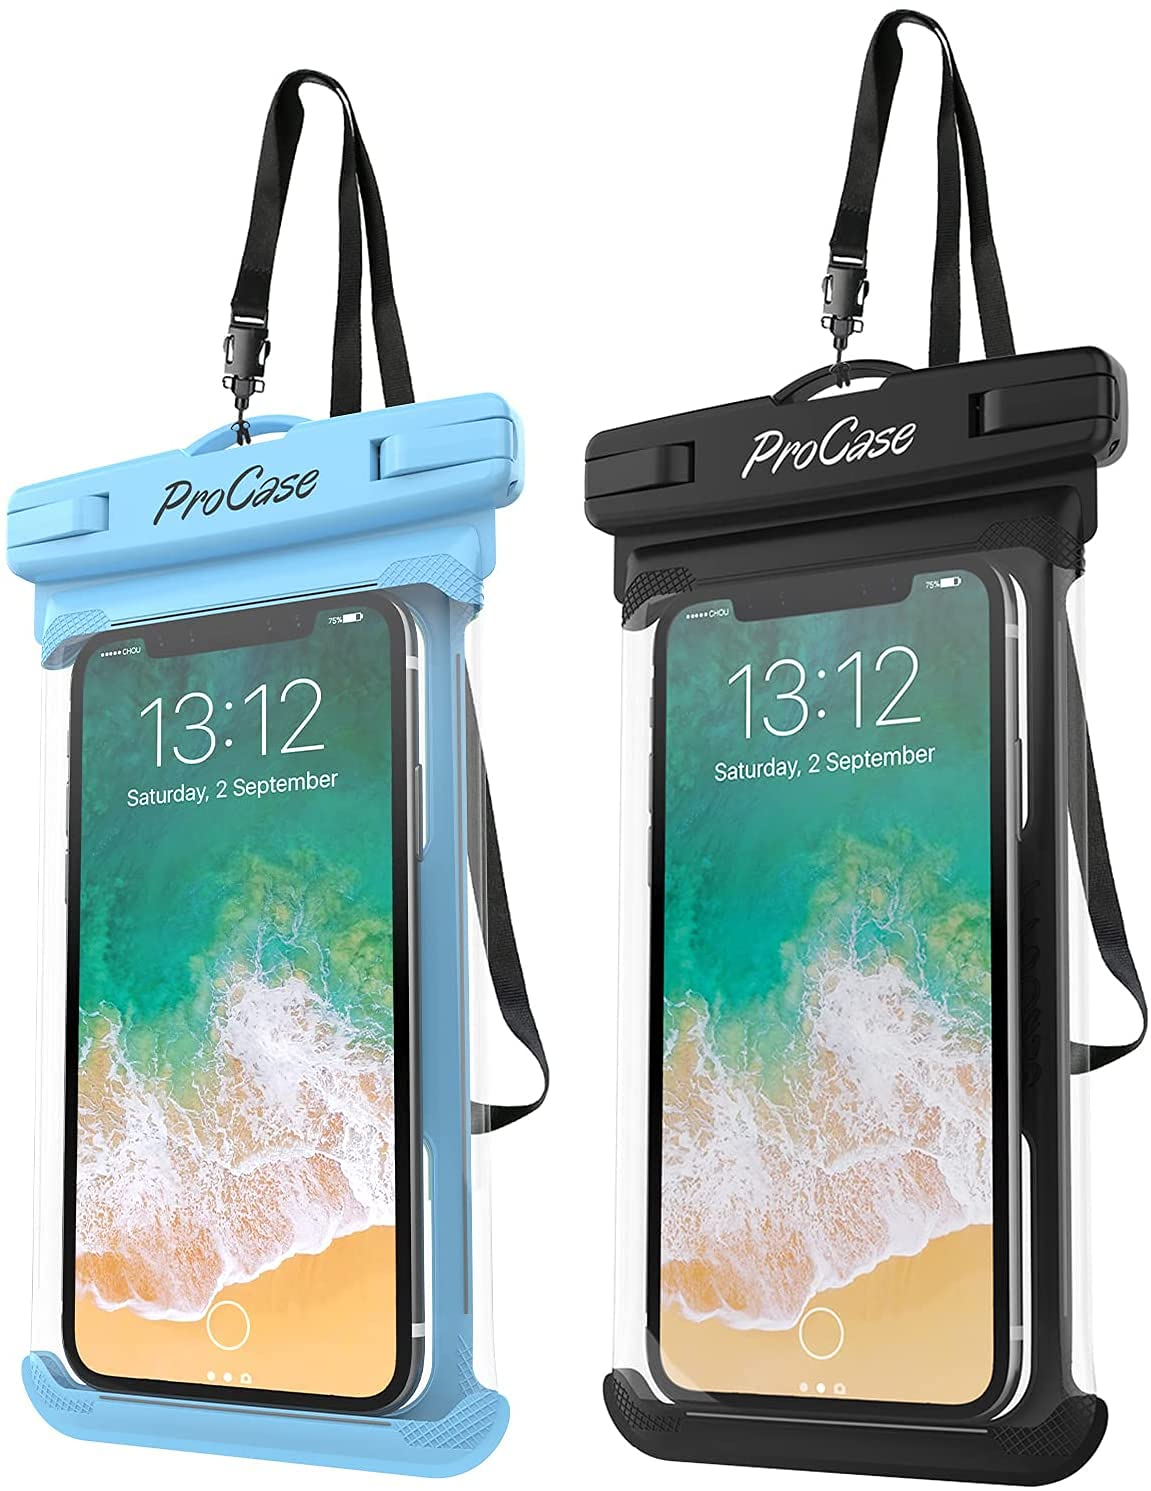 [2 Pack] ProCase Waterproof Phone Case Dry Bag Pouch, for iPhone 13 Pro Max, Xs Max, XR, X, 8,7 Plus, 6S Plus, Galaxy S20 Ultra S10 Plus S9 S8 / Note10 9 8 6 5, Pixel 4 XL 3 2 -Black/Blue